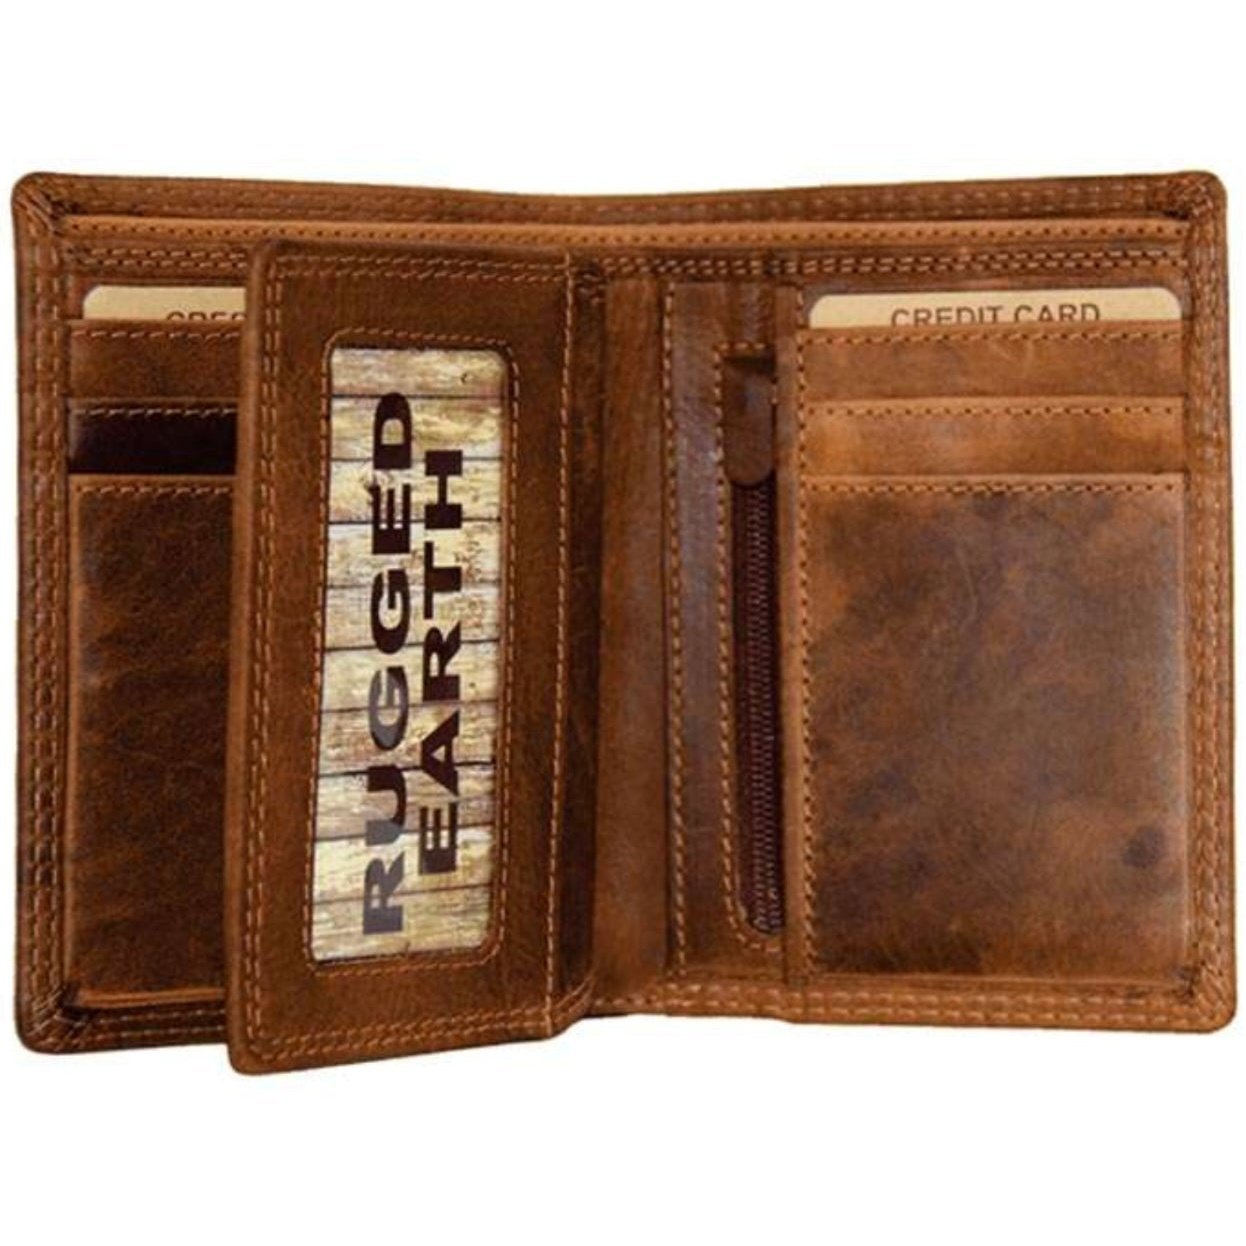 Rugged Earth Men’s Slim Leather Wallet Brown 990007 - Rugged Earth